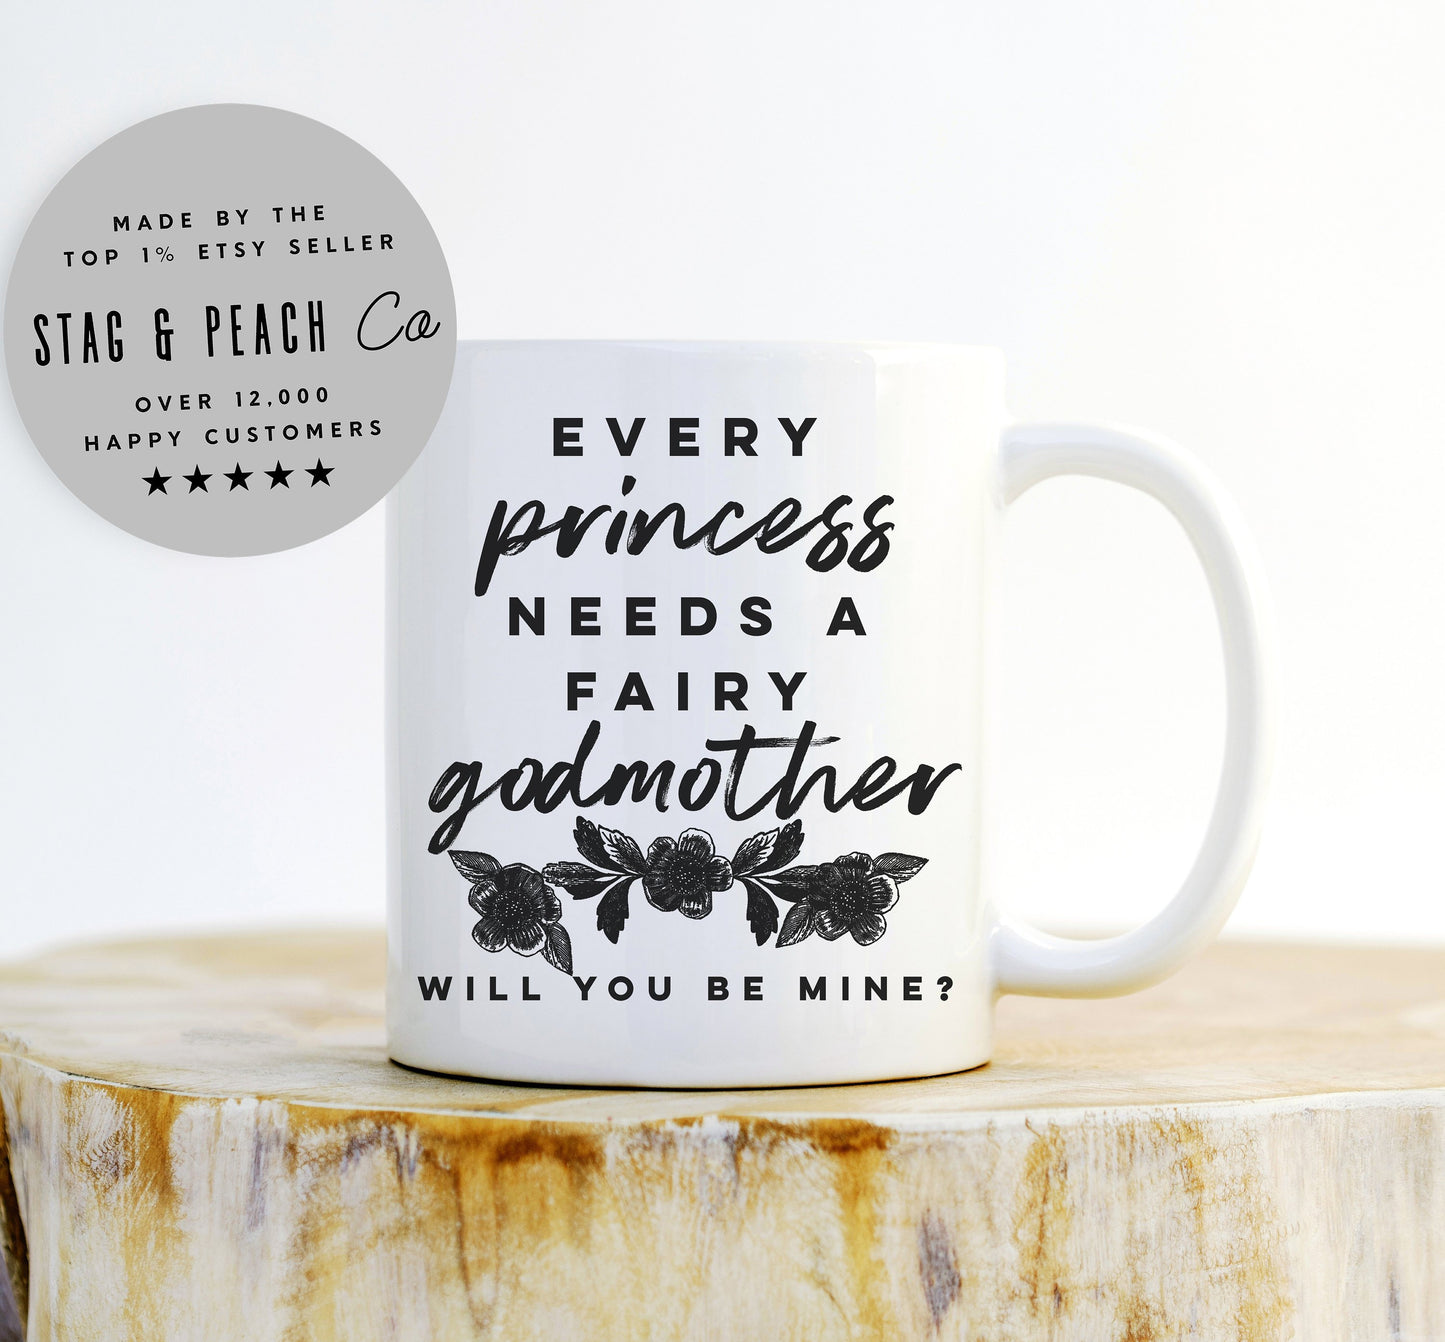 Godmother Mug - Every Princess Needs A Fairy Godmother, Will You Be My Godmother?, Godmother Gift, Godmother Proposal, Gift From Goddaughter